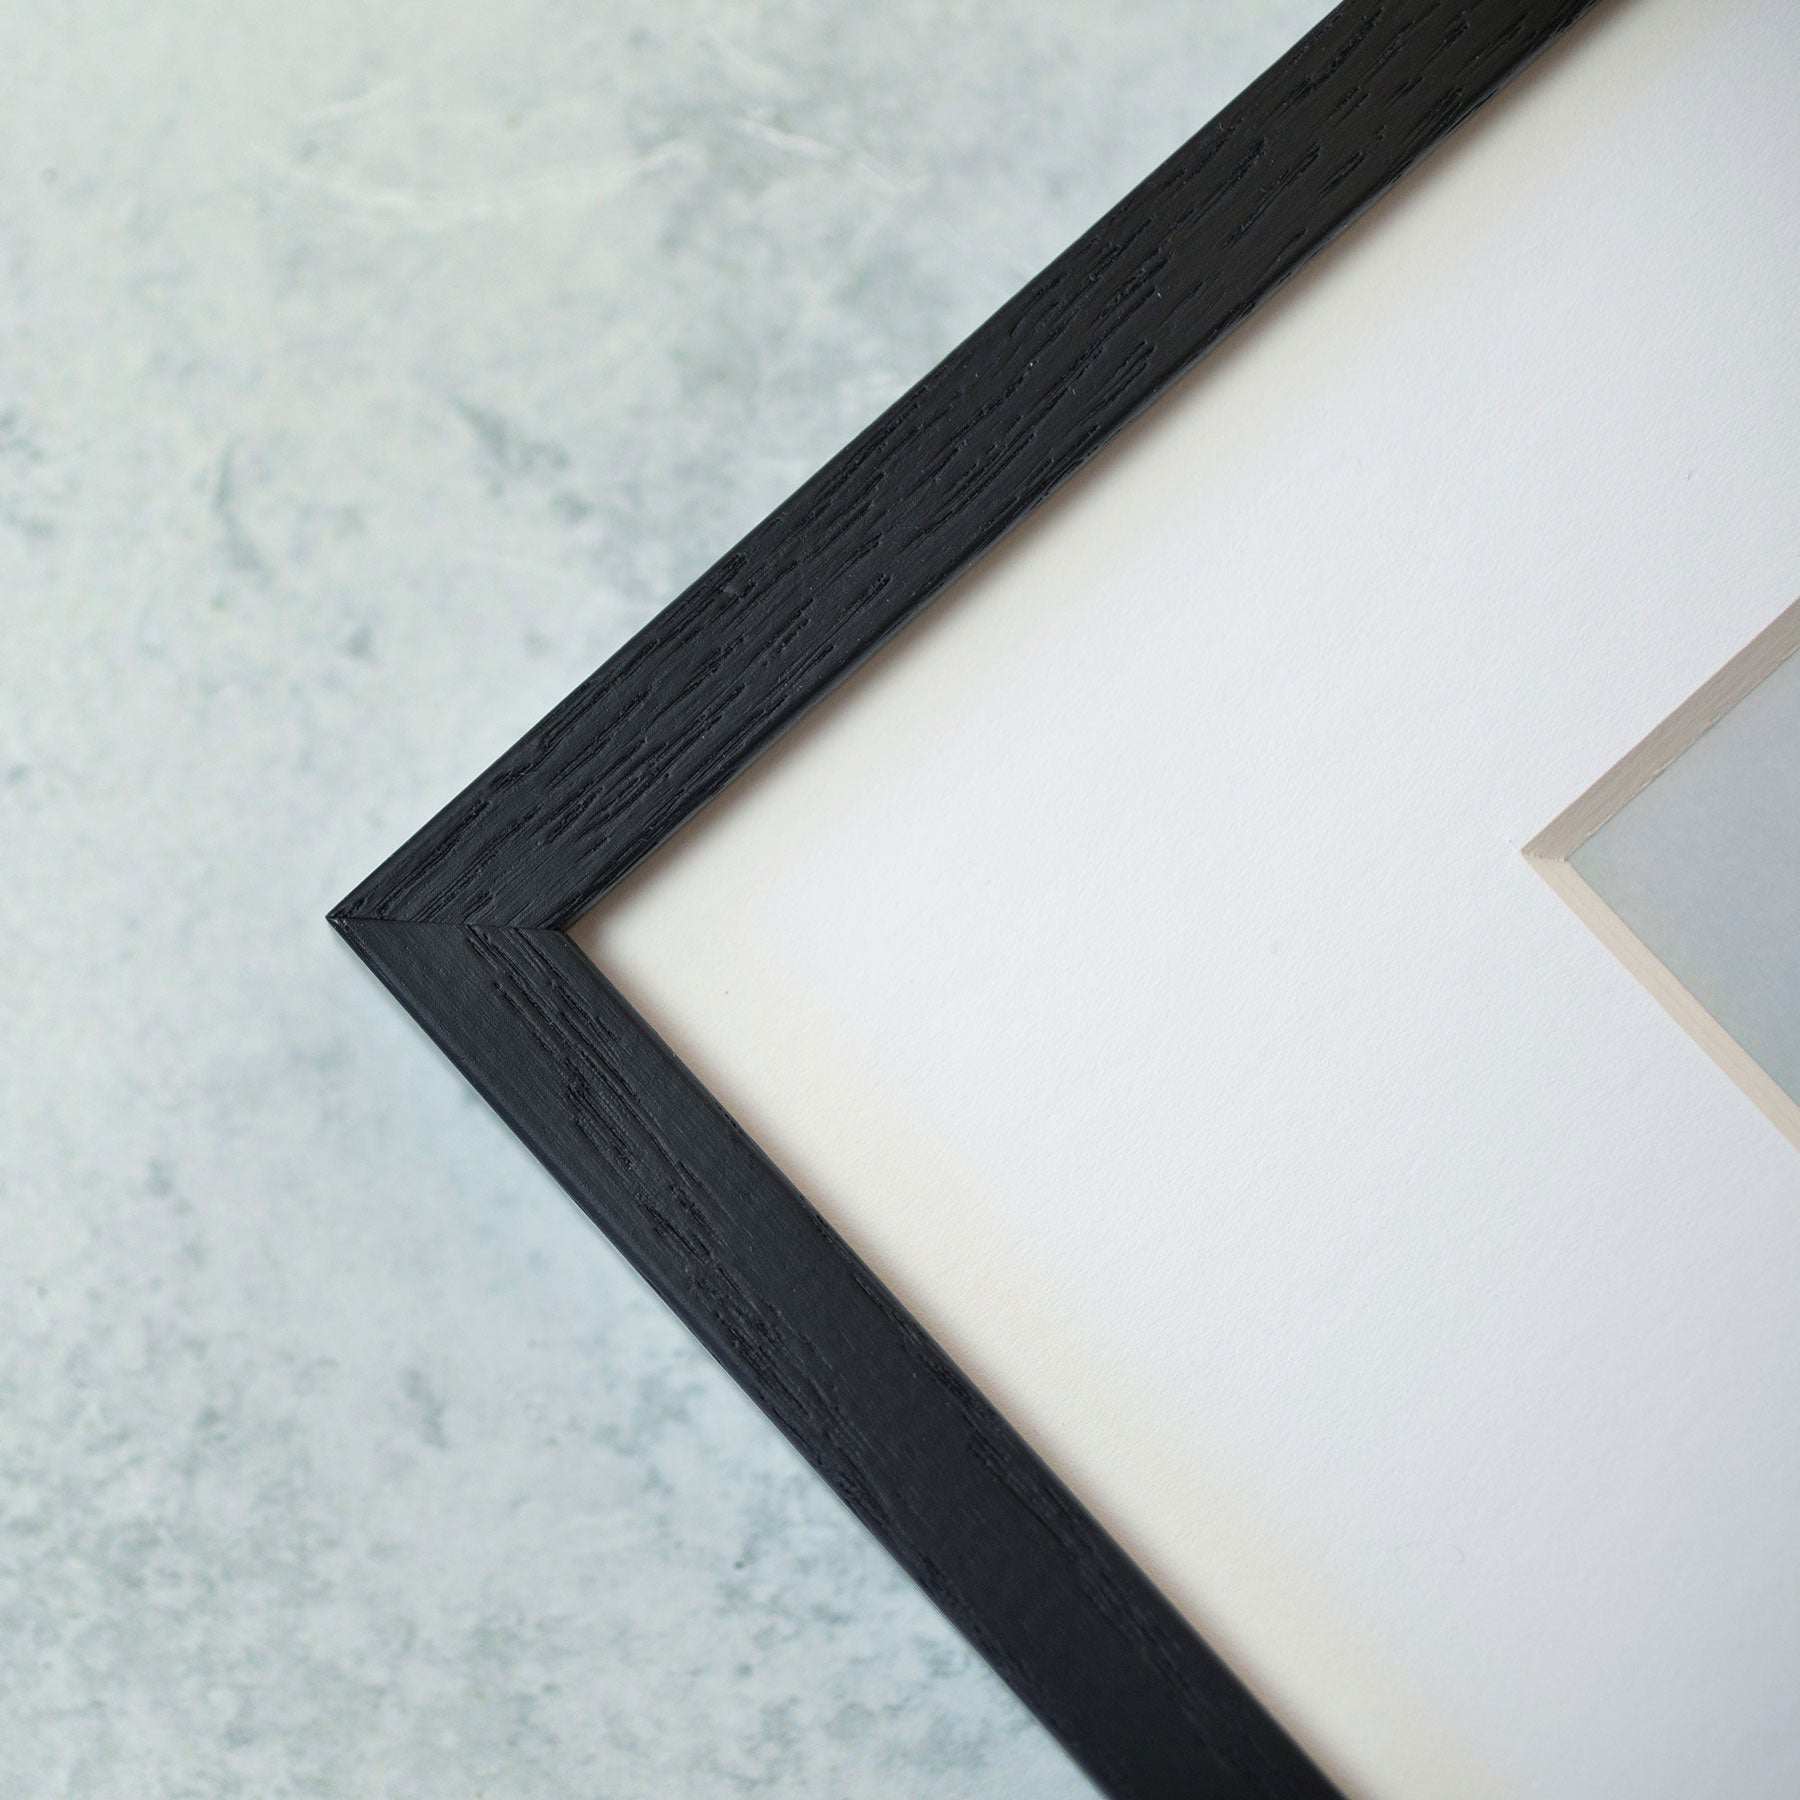 Close-up image of a black picture frame's corner. The frame, enclosing the Offley Green Nautical Print 'The Lighthouse', is set against a light, textured background and features a white mat border. The focus is on the clean lines and quality craftsmanship of the frame.